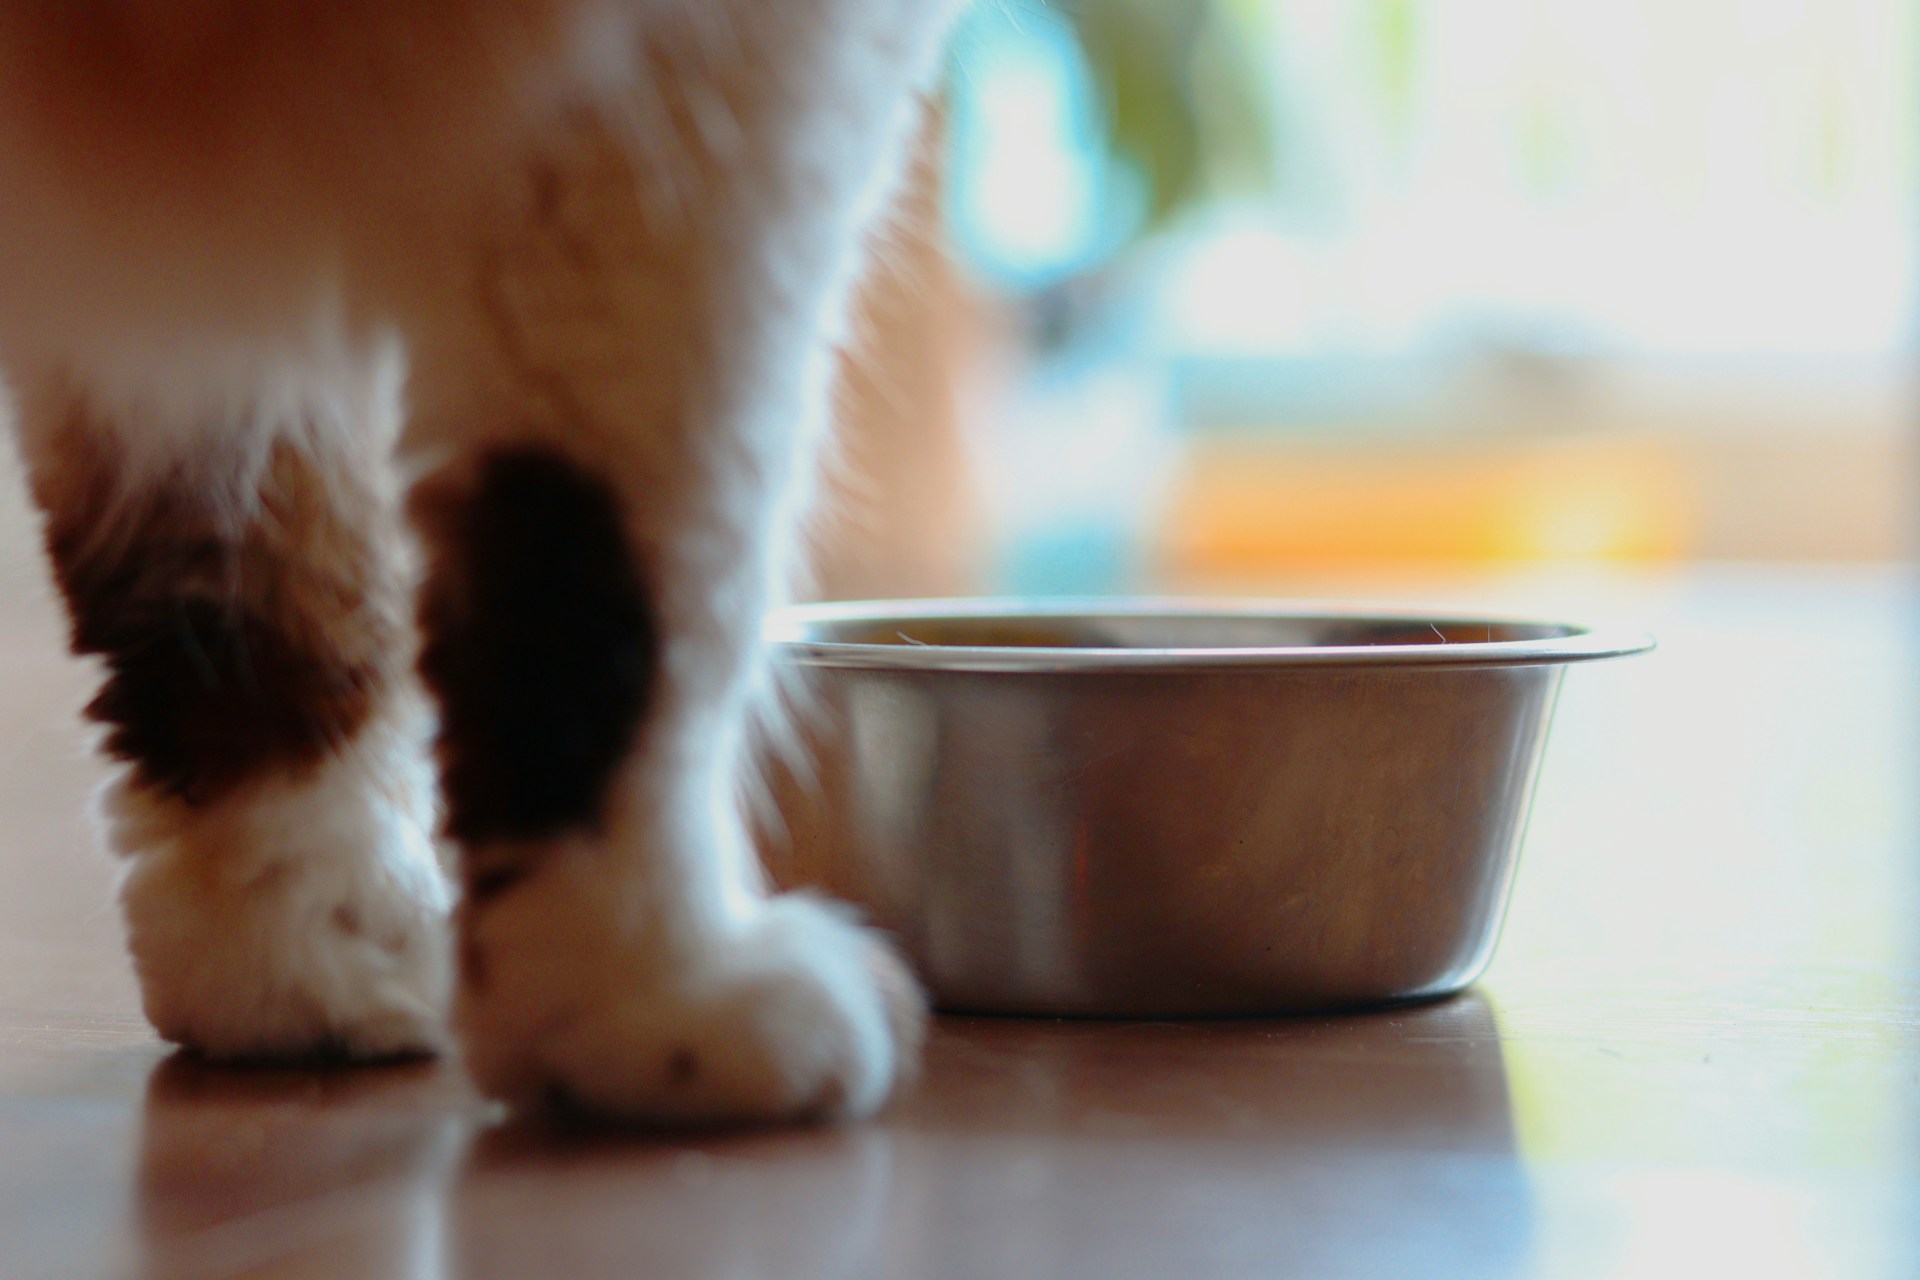 A cat's paws beside a water bowl